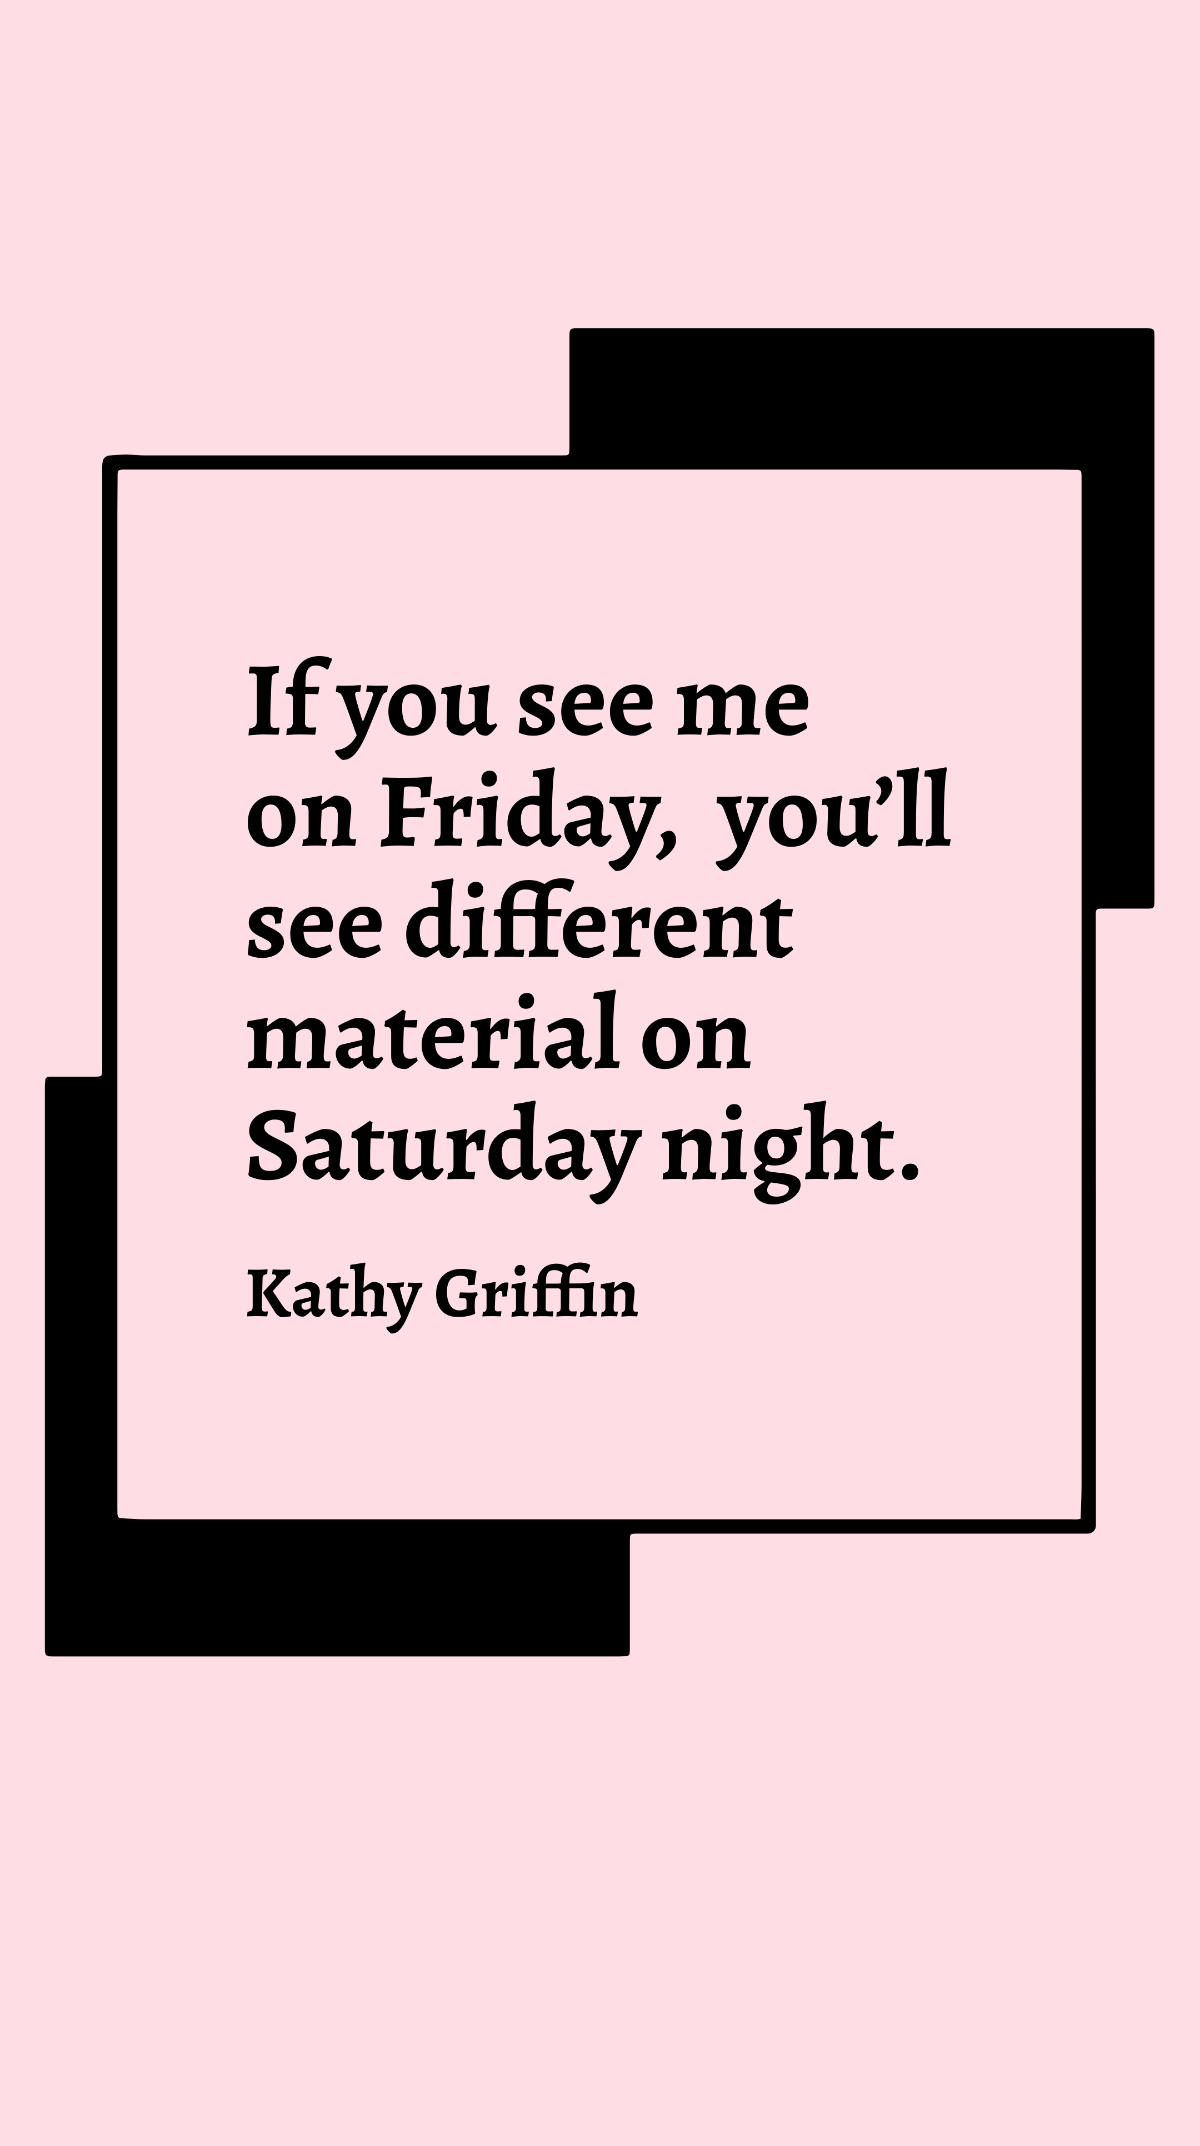 Free Kathy Griffin - If you see me on Friday, you’ll see different material on Saturday night. Template